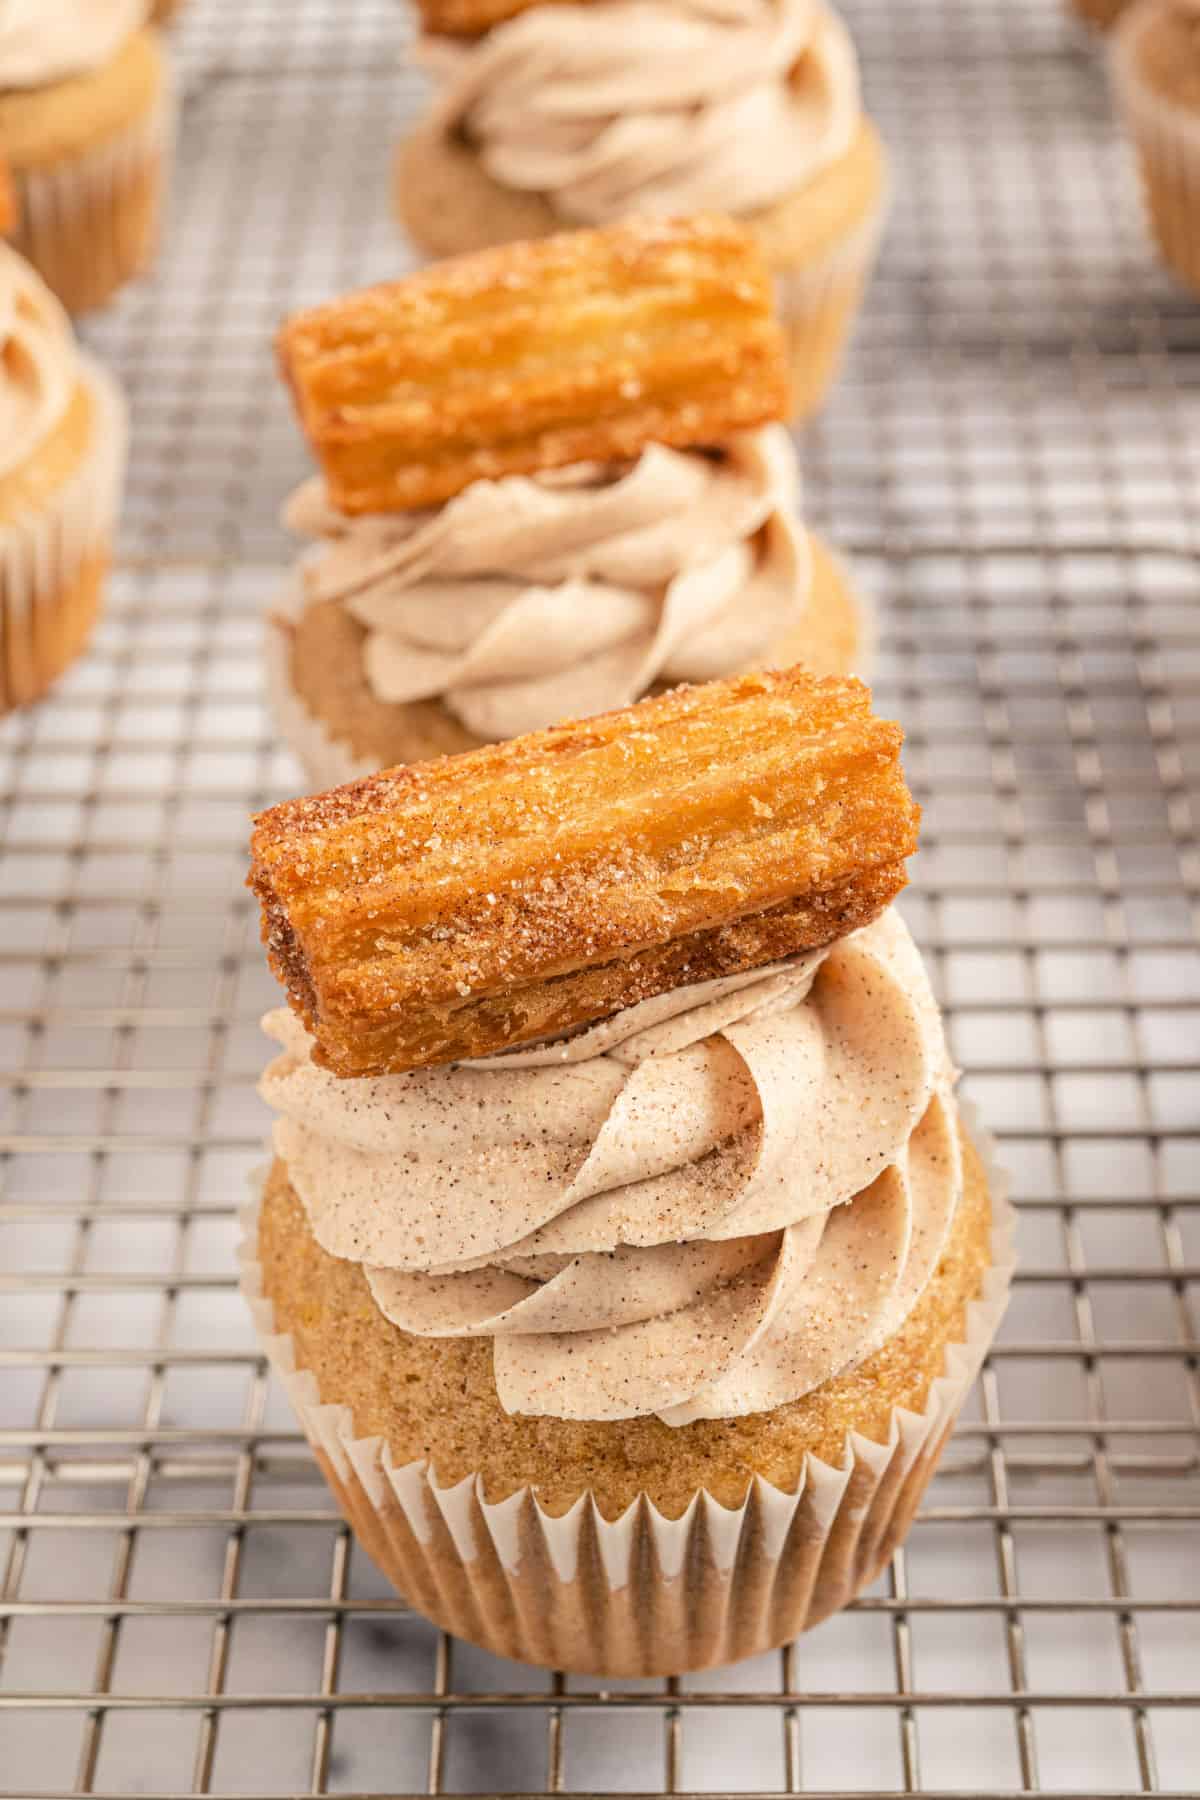 Cinnamon sugar frosted cupcake with a churro on top.